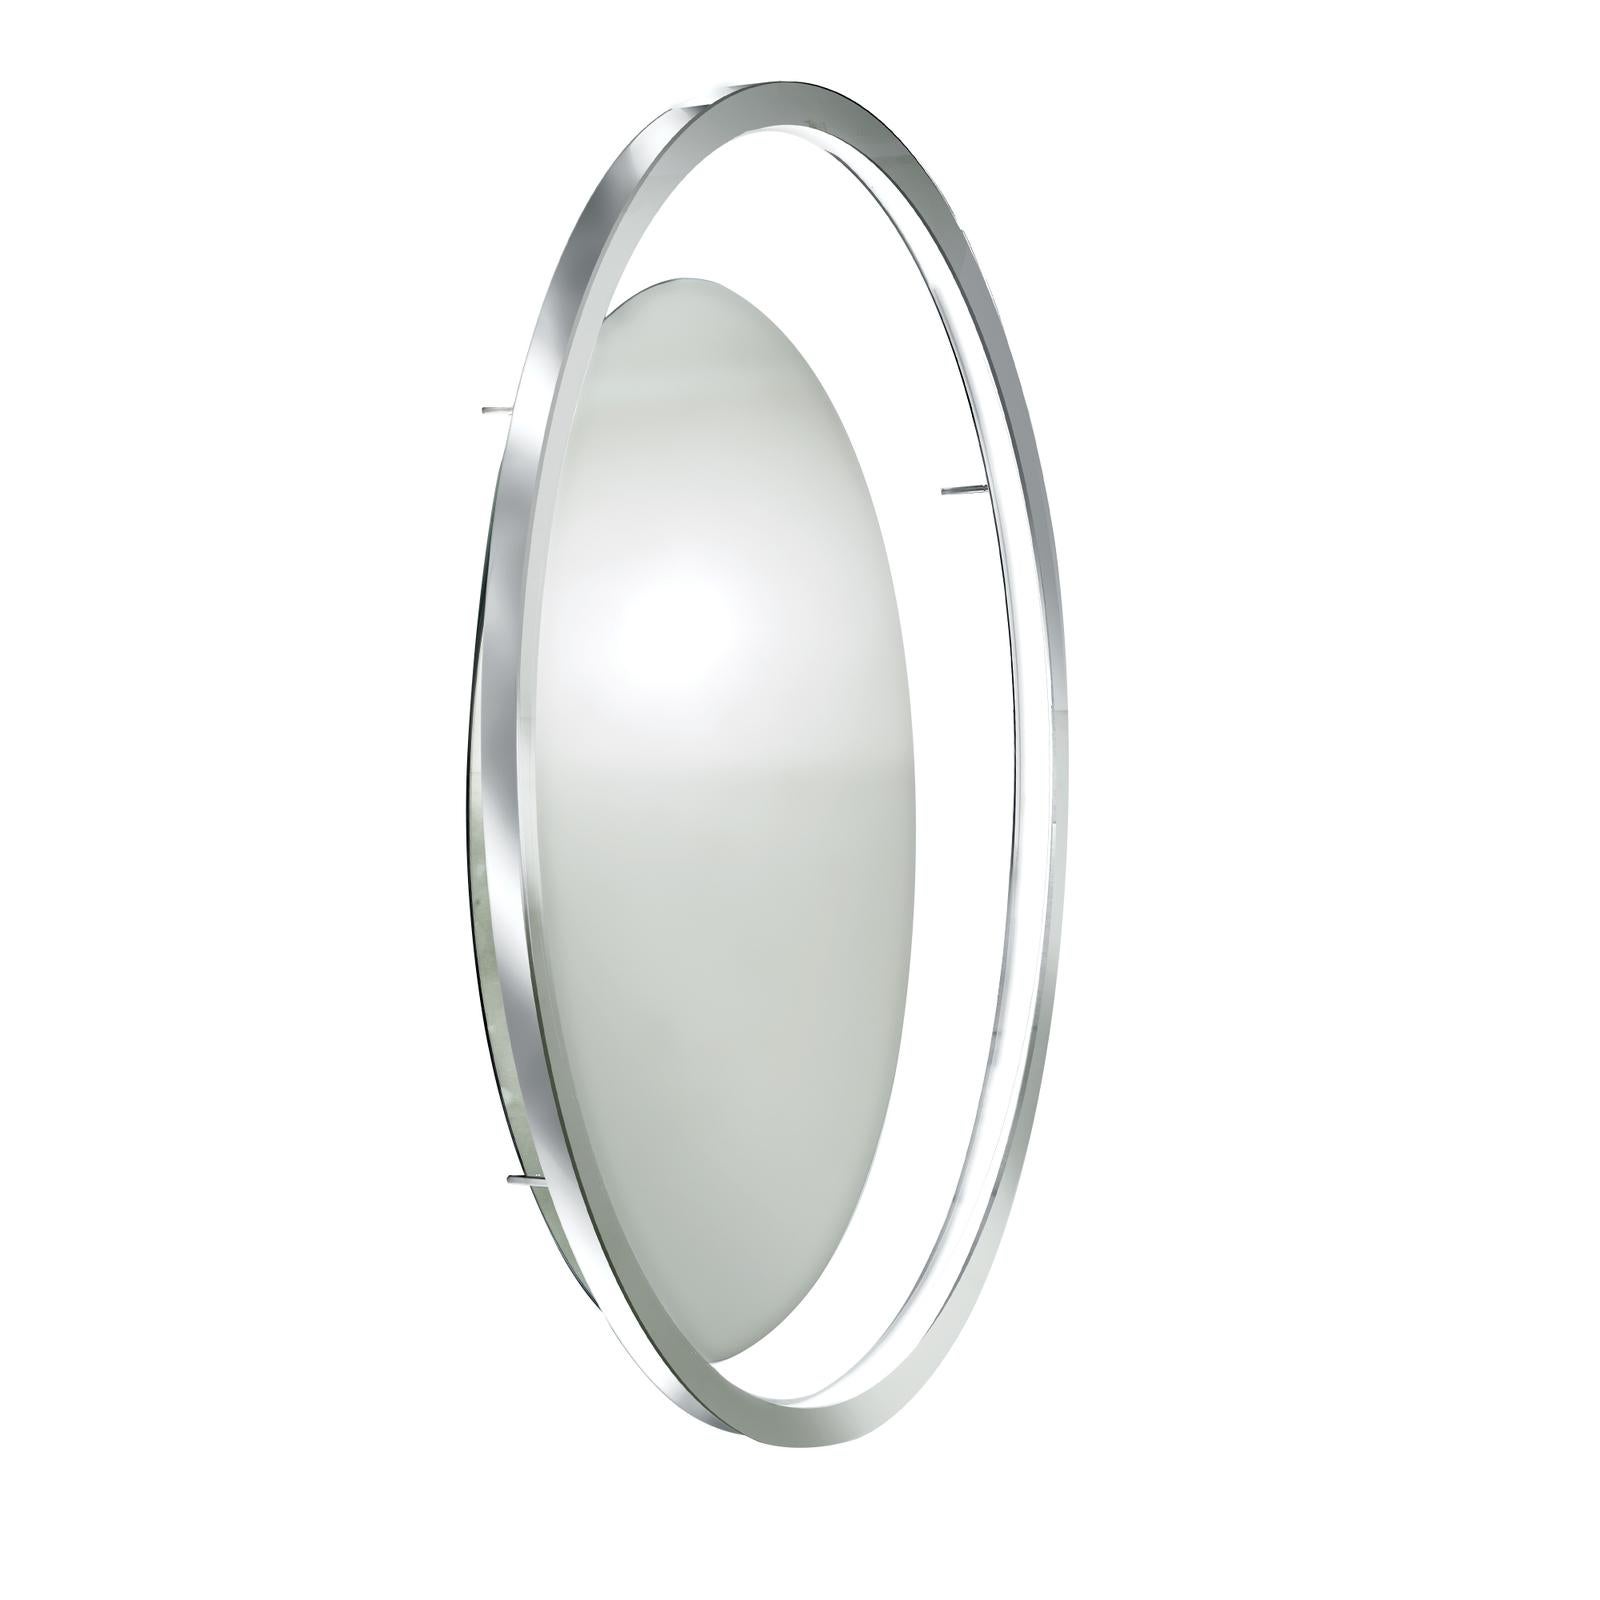 A stunning addition to a powder room as a wall mirror or a bedroom on top of a vanity desk to apply makeup, this piece will add a sophisticated and modern flair to any interior. The round surface of the piece is surrounded with a metal frame with a